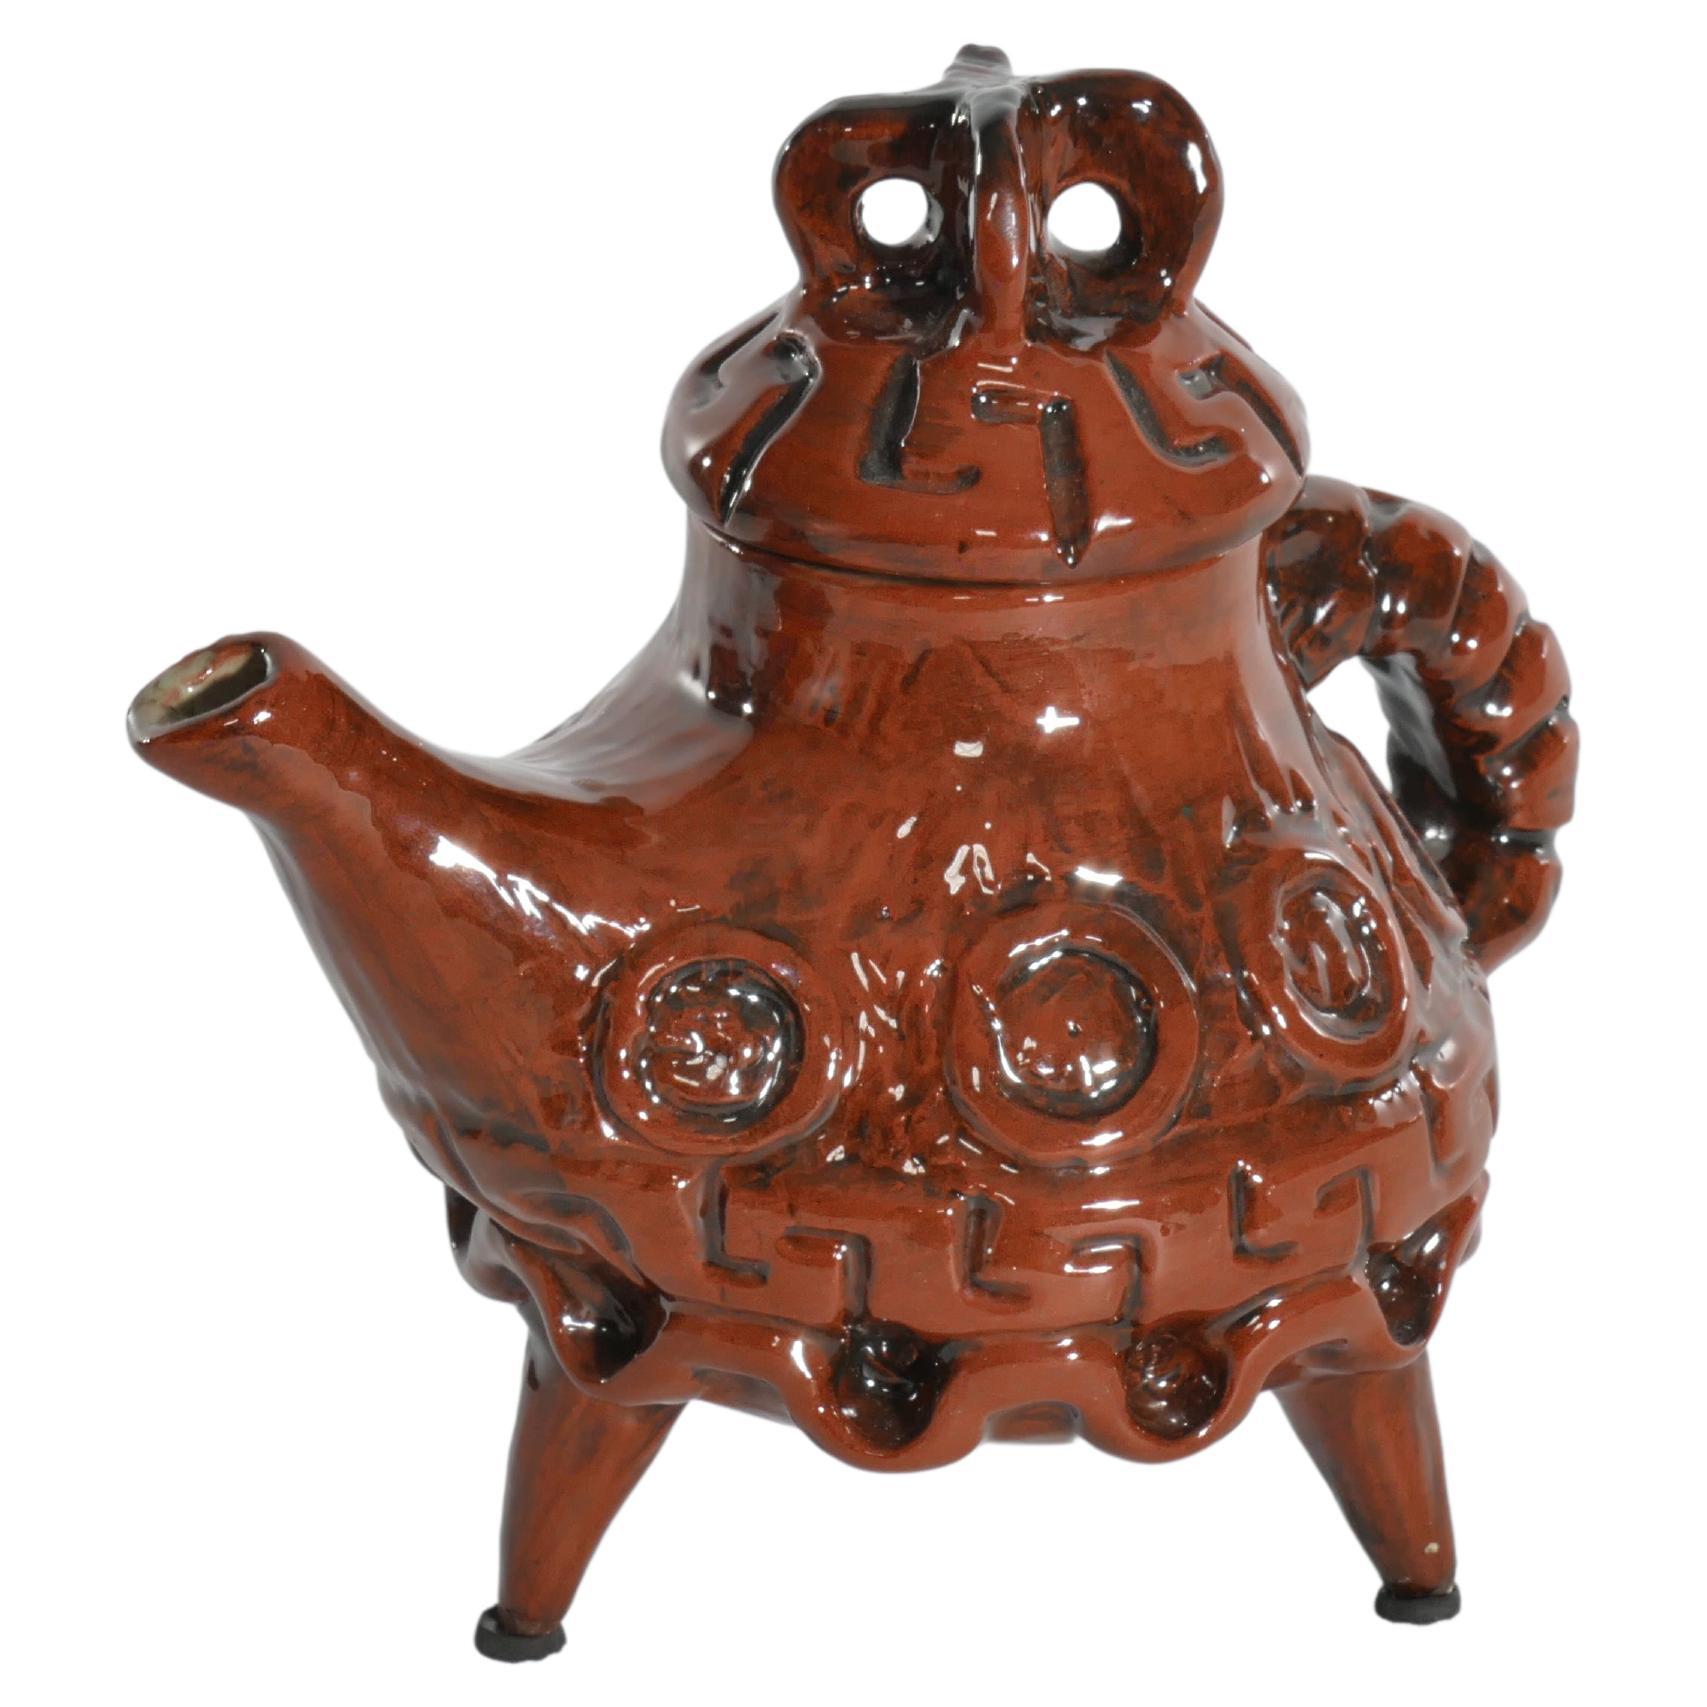 Vintage Playful Teapot with Crab-like Features by Allan Hellman Sweden 1982  For Sale